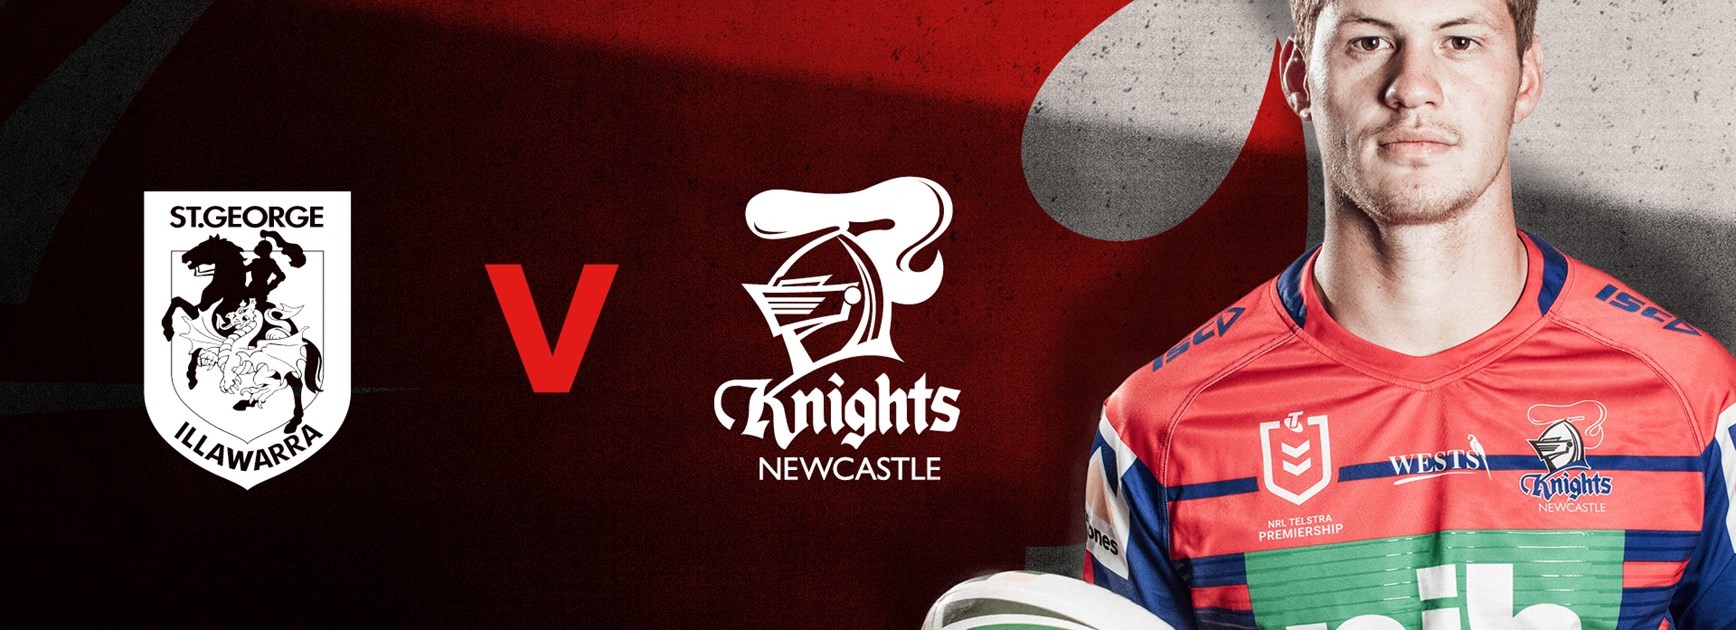 Live streaming: Knights broadcasting both trials